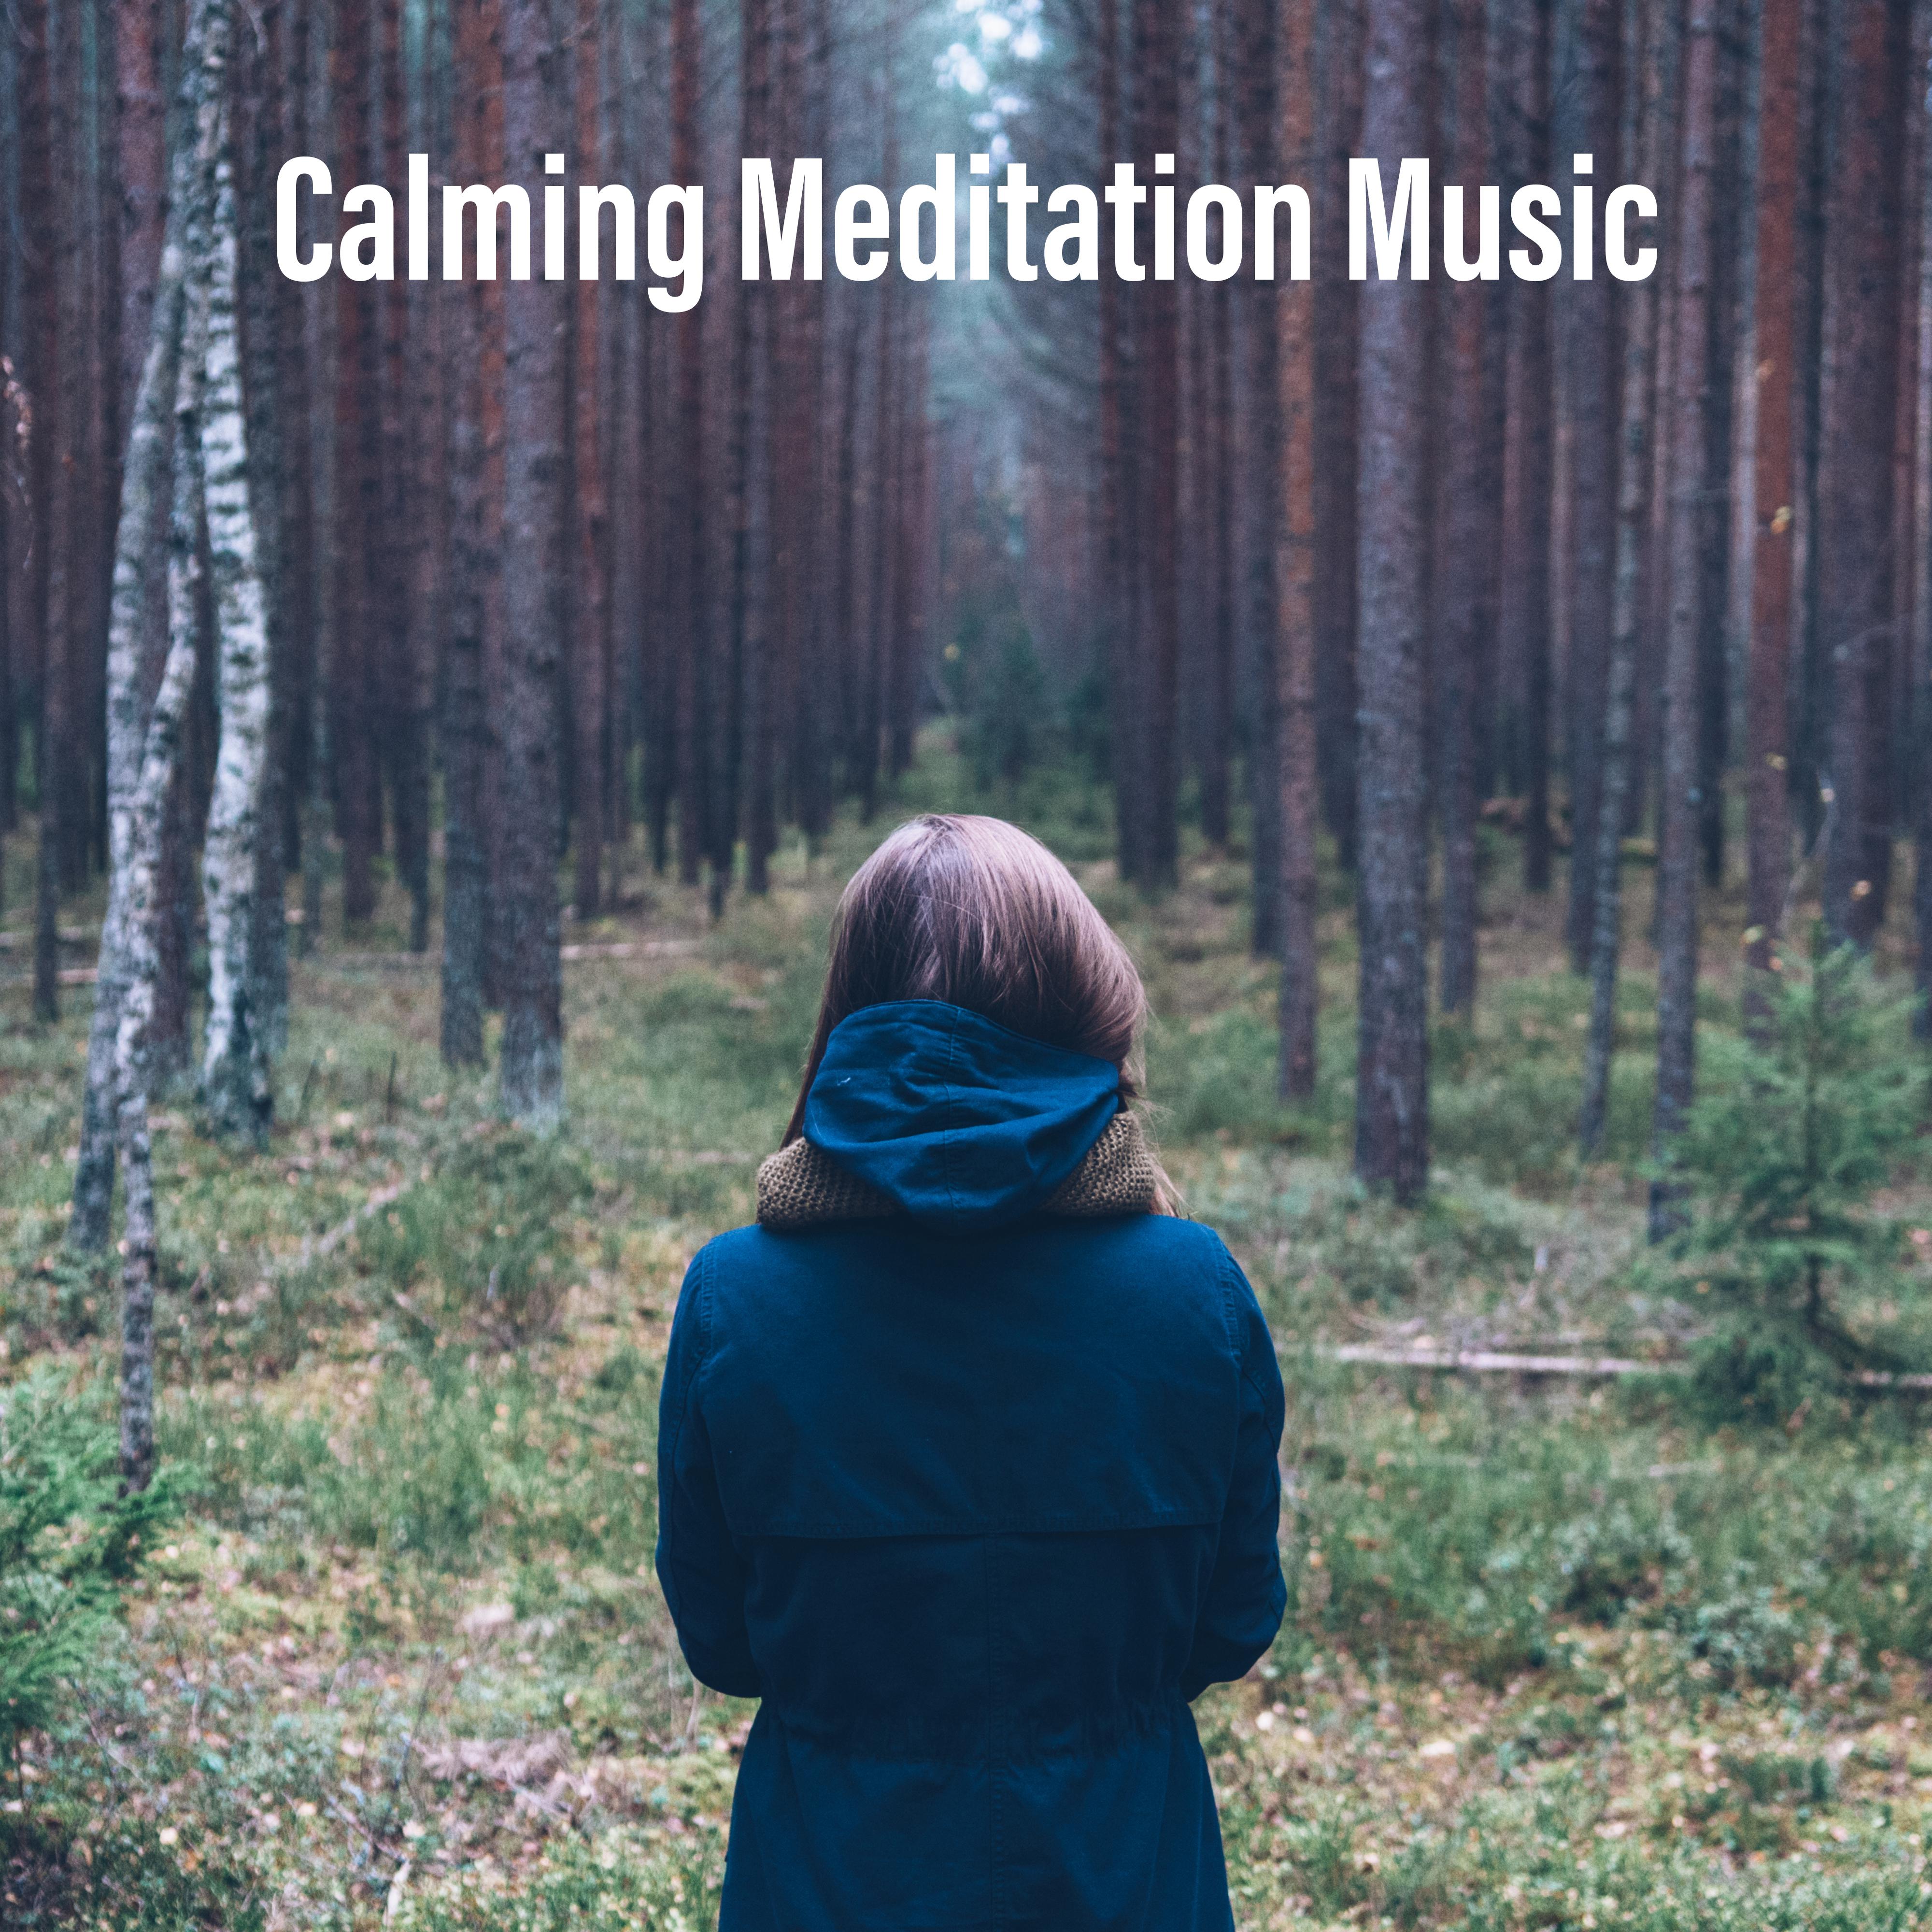 Calming Meditation Music  Soft Sounds to Relax, Rest with New Age Music, Soothing Waves, Inner Journey